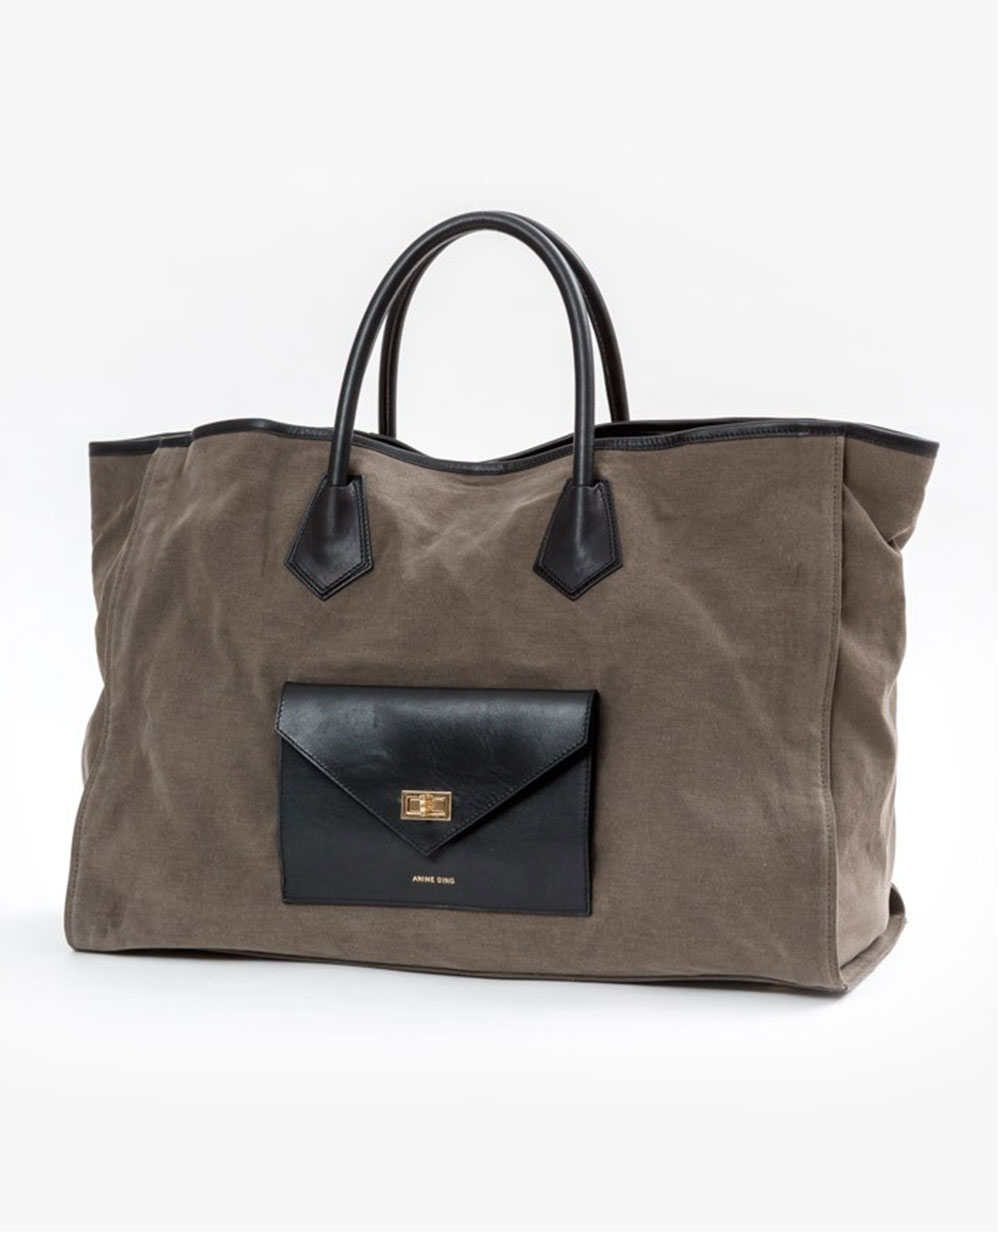 Anine Bing Bag, $1,199 from Superette